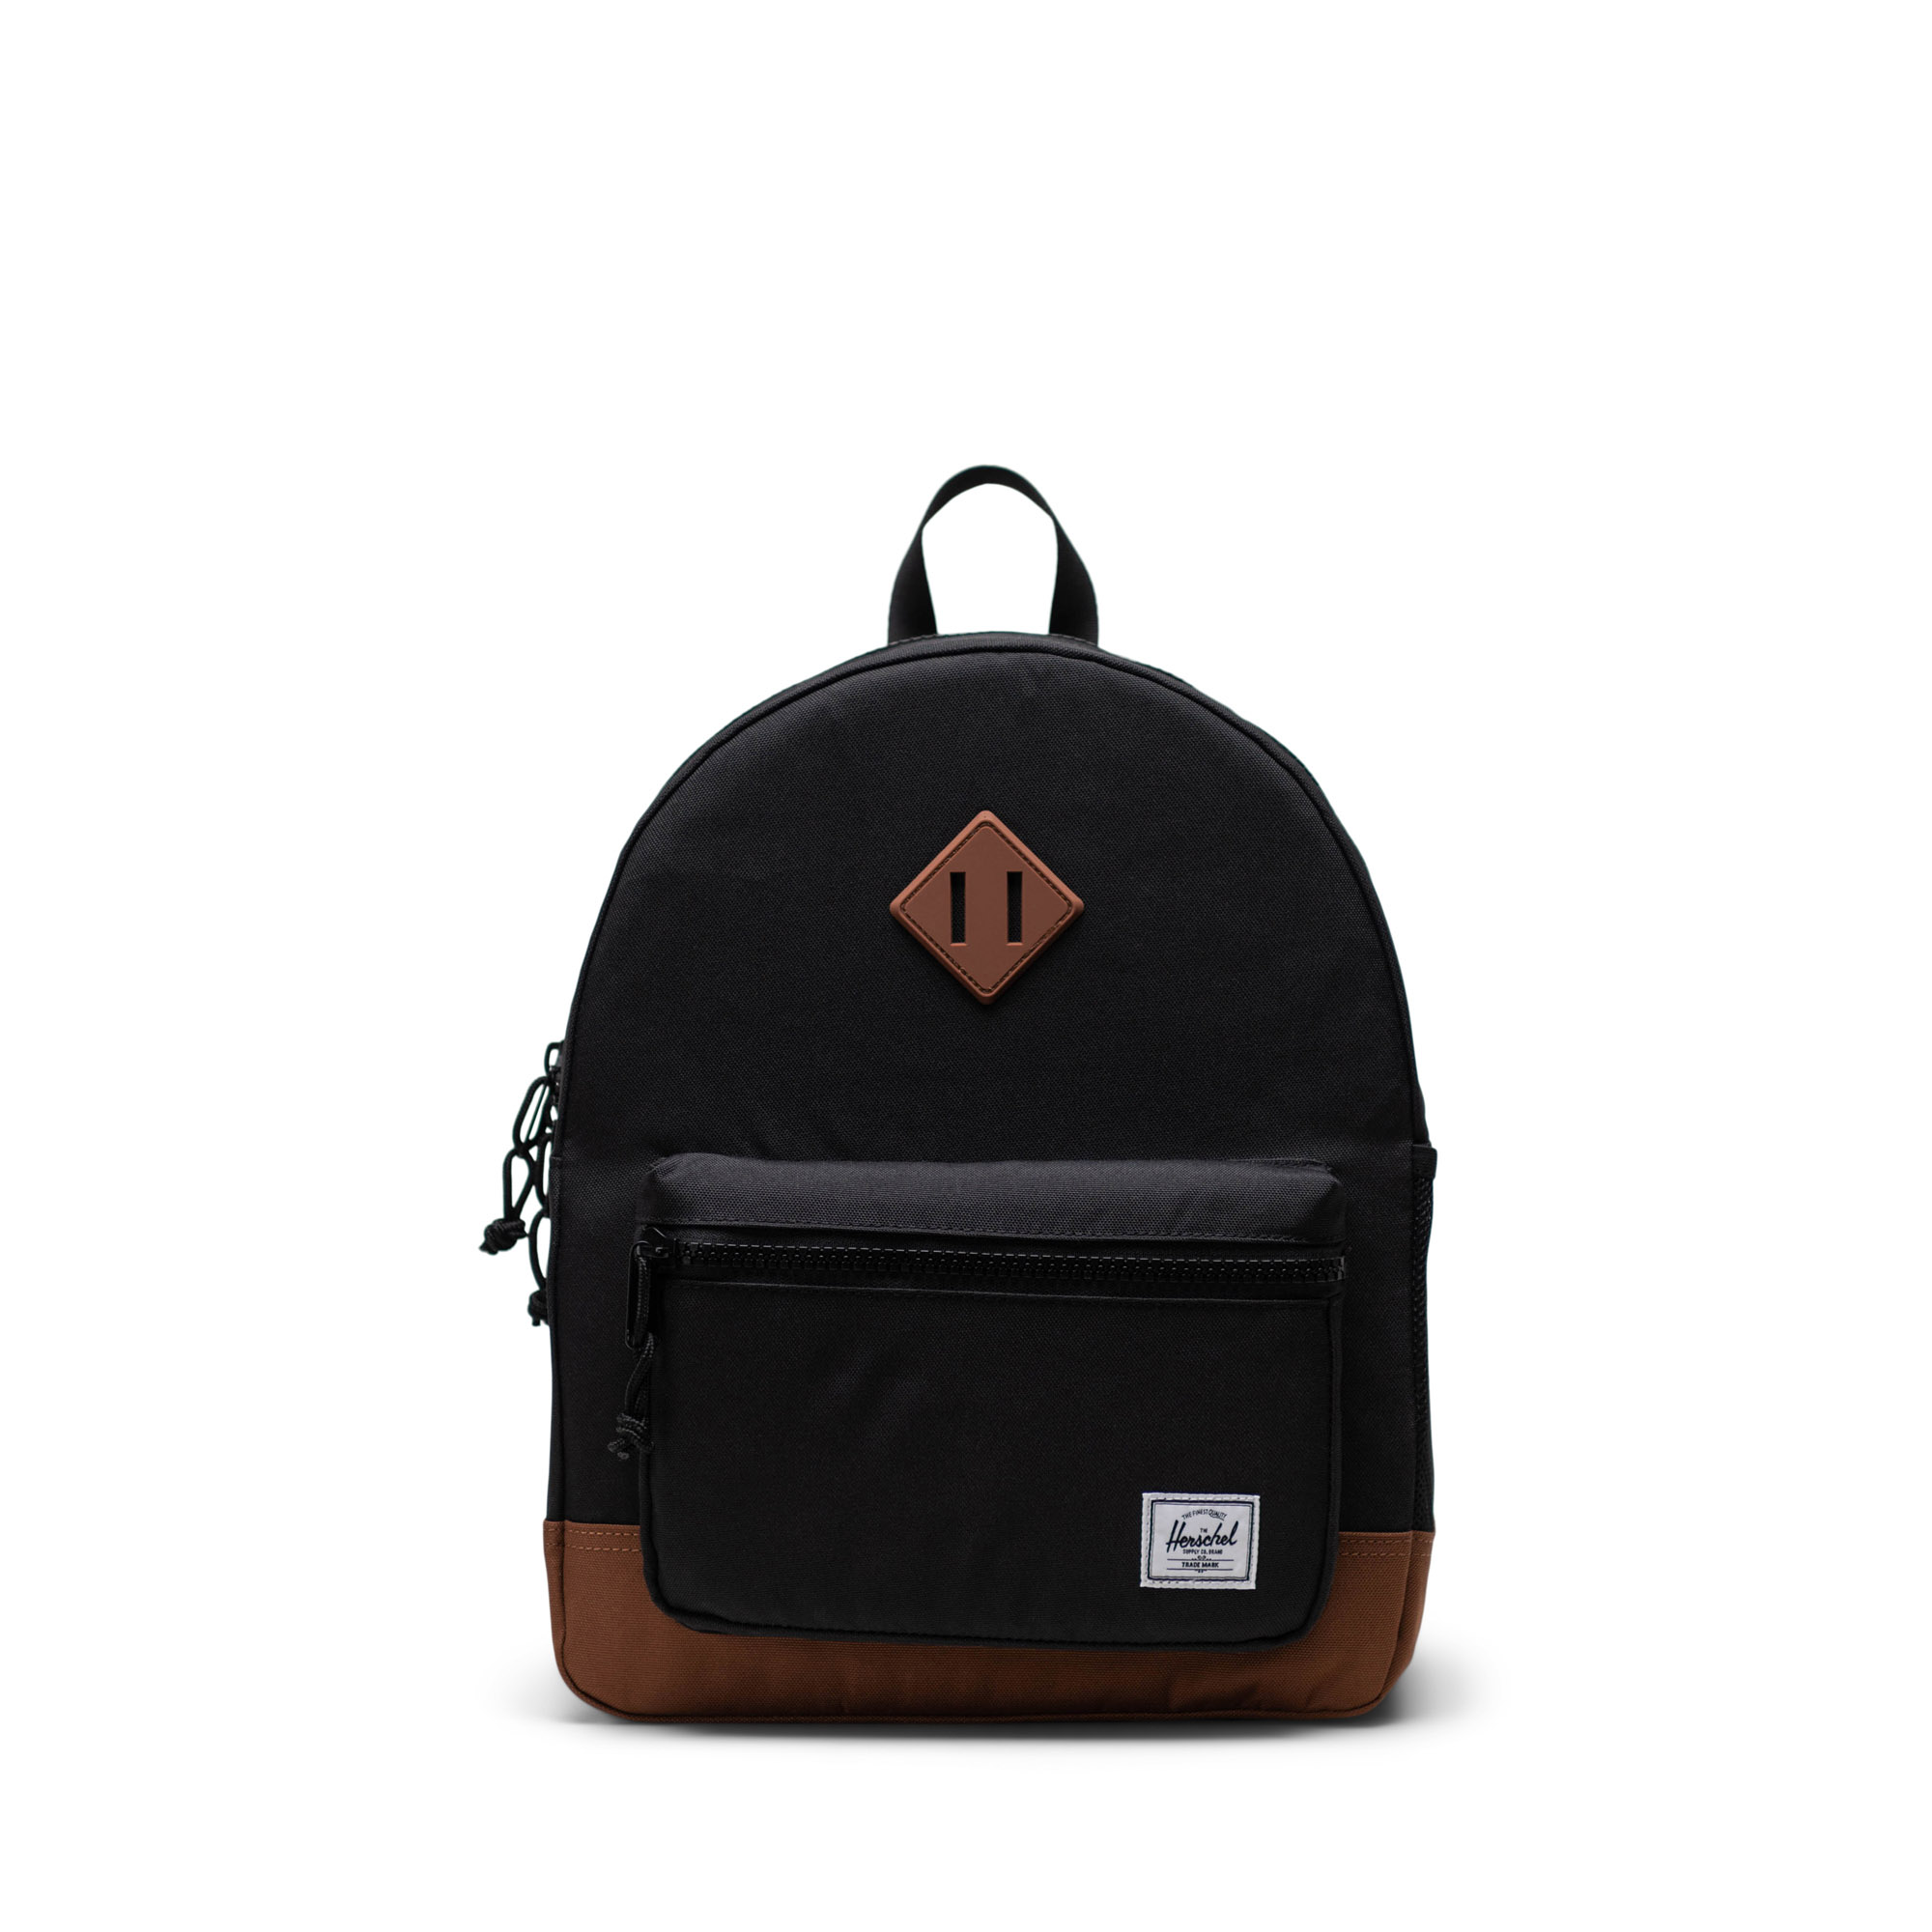 Heritage Backpack Youth 16L | Herschel Supply Co.